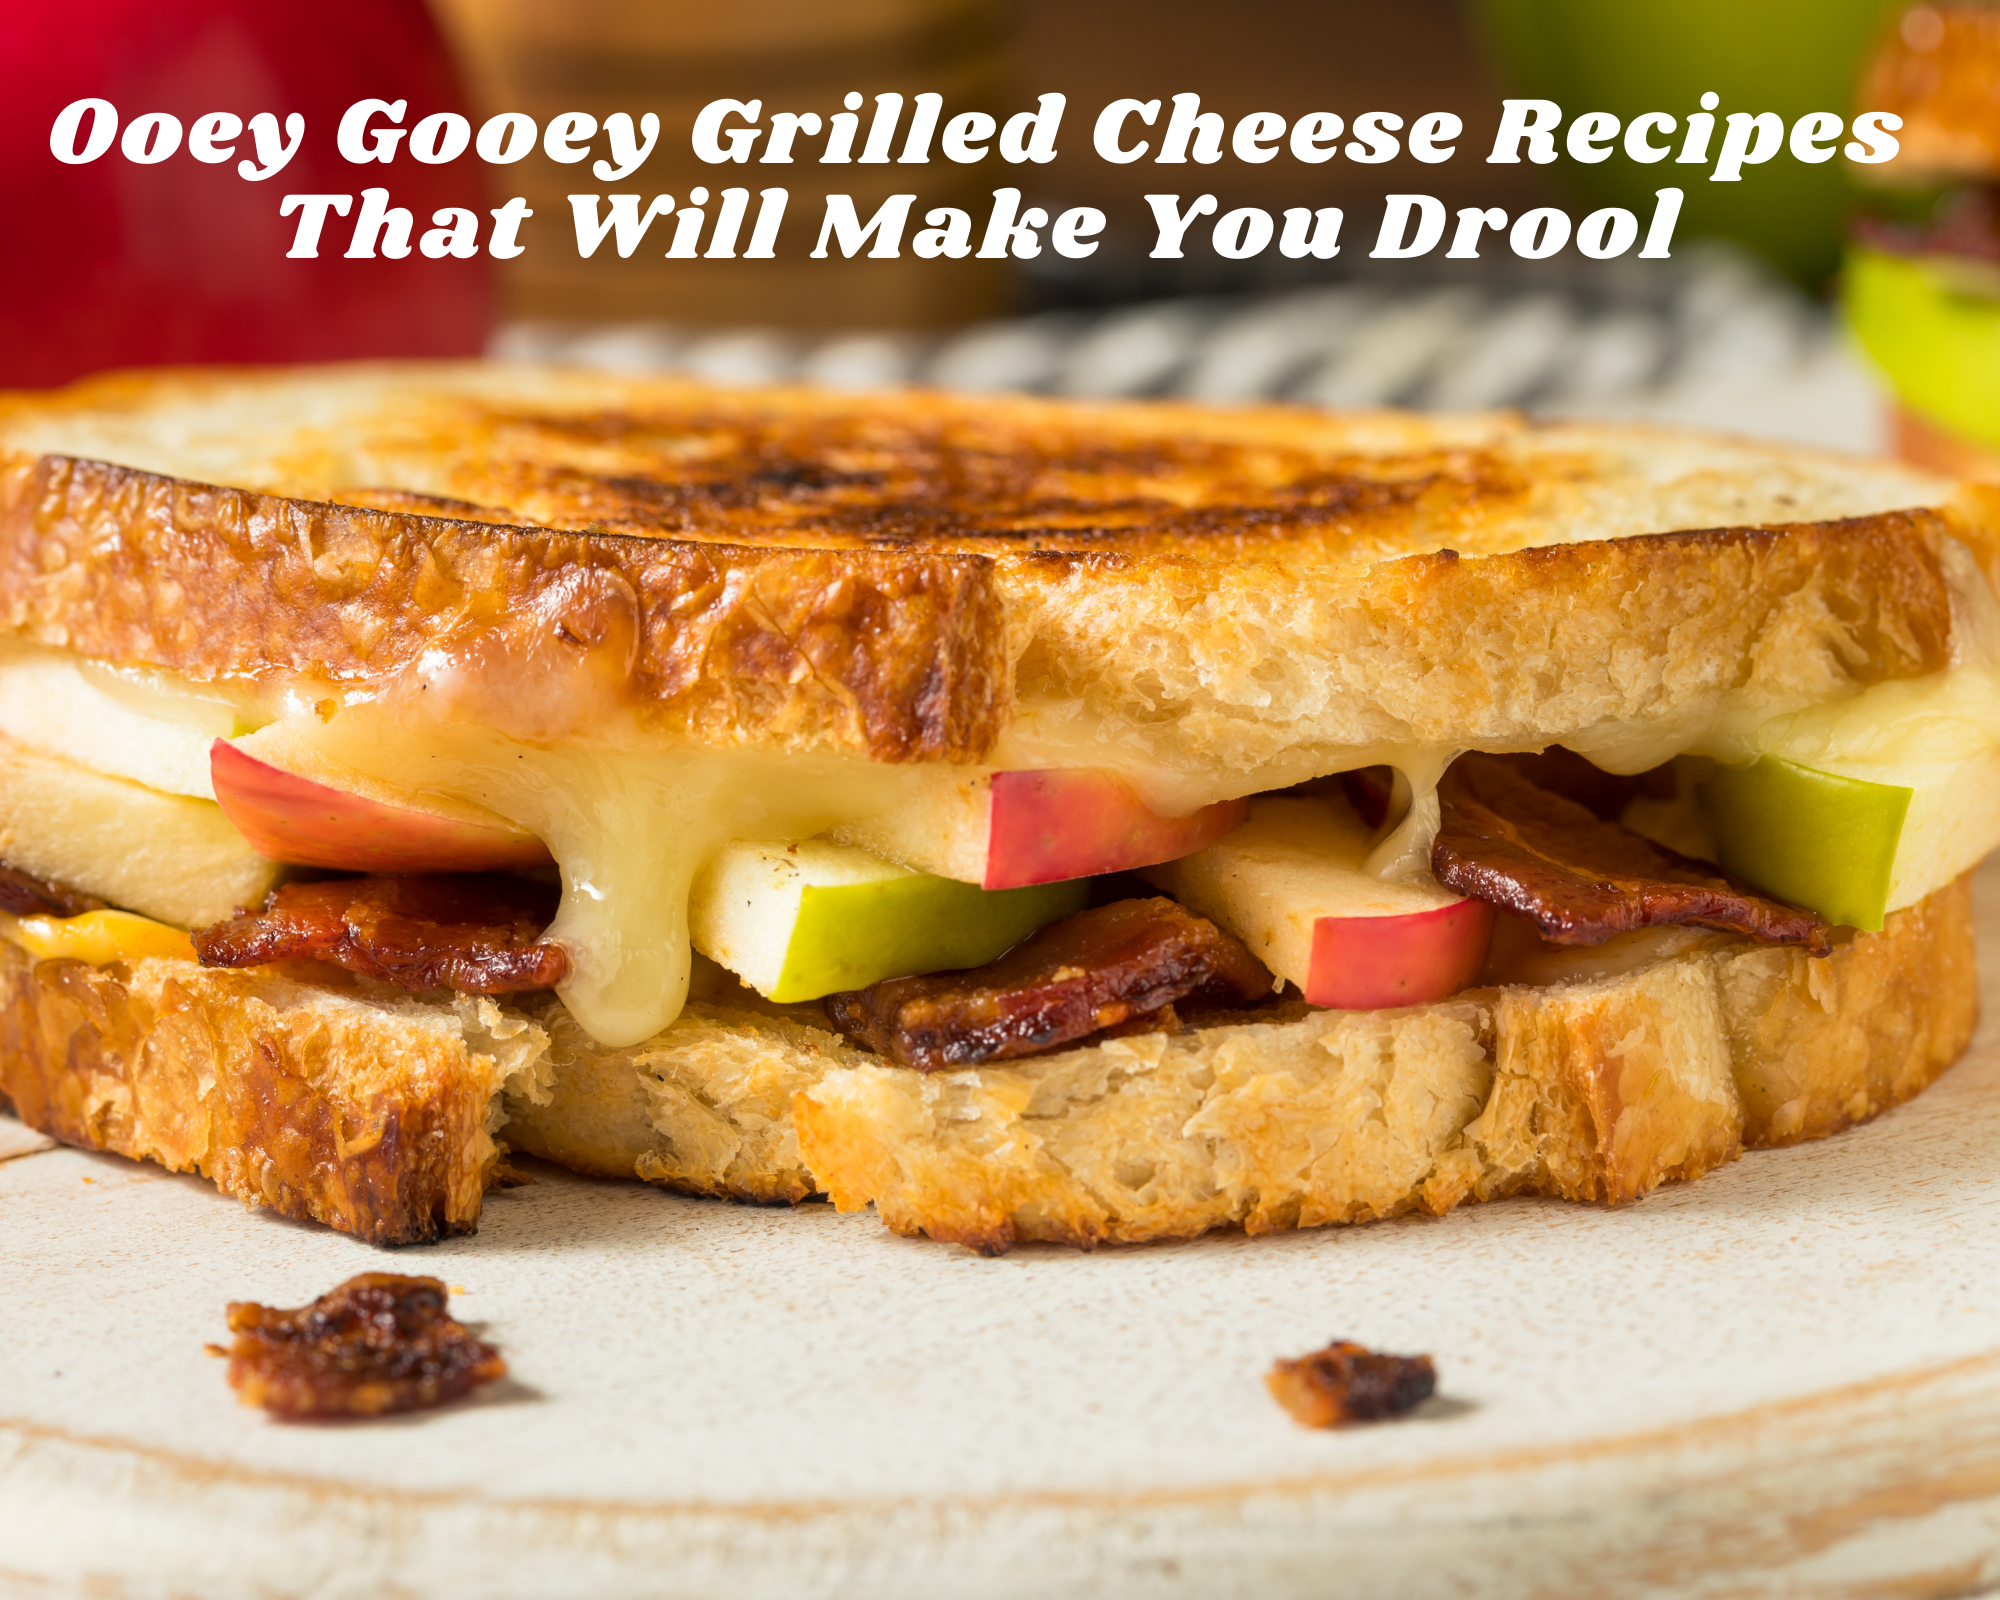 Apple bacon grilled cheese